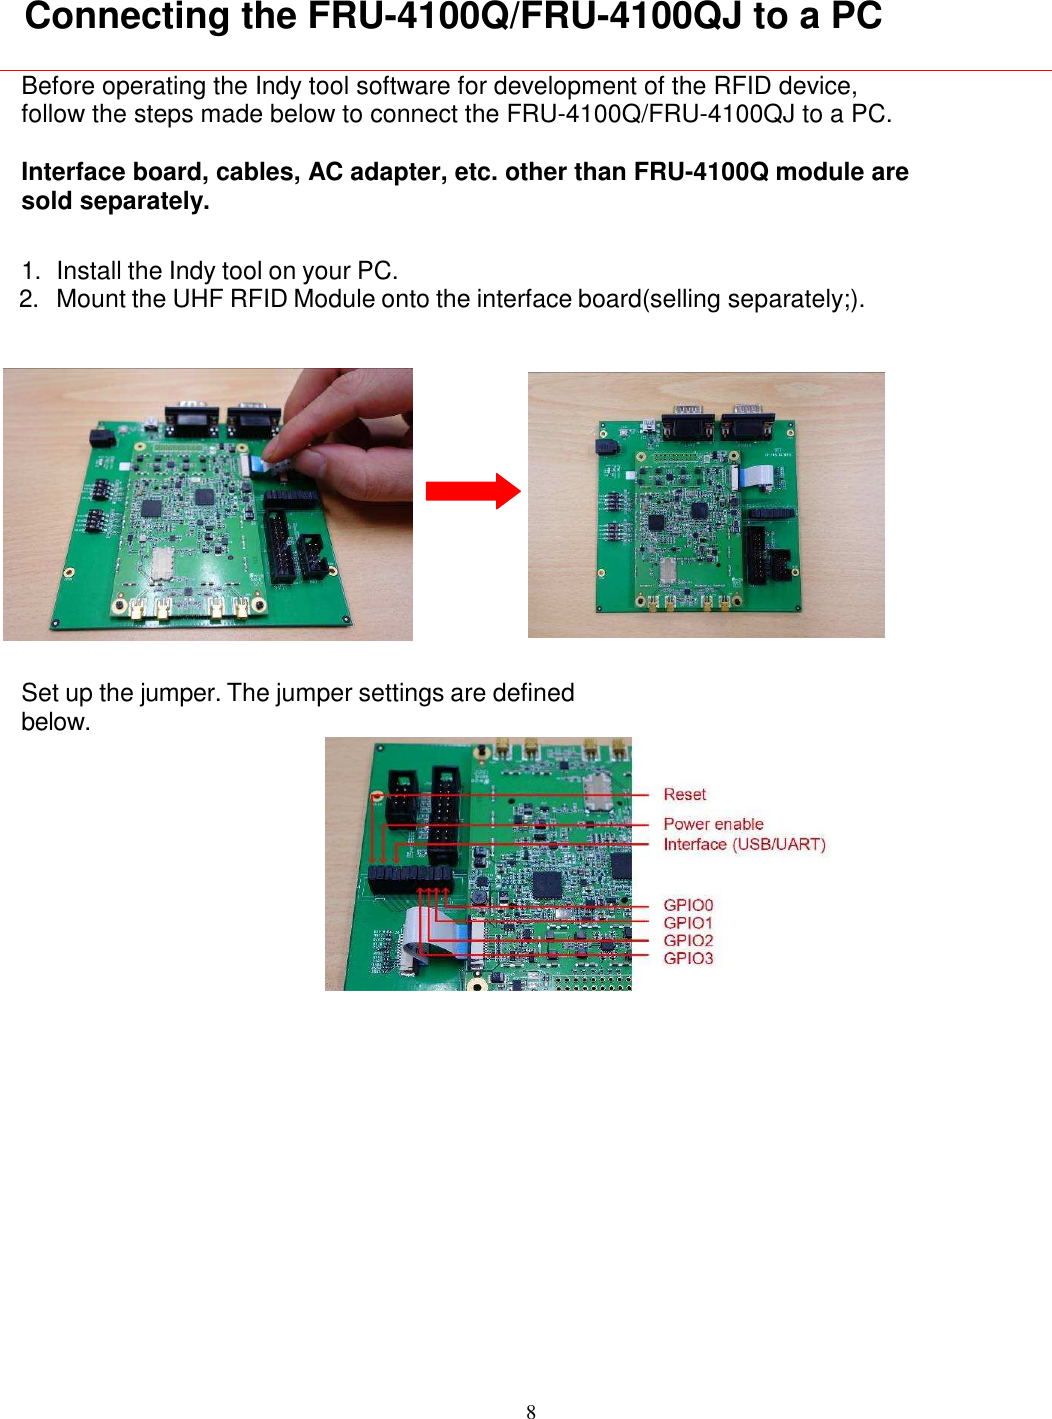 8    Connecting the FRU-4100Q/FRU-4100QJ to a PC  Before operating the Indy tool software for development of the RFID device, follow the steps made below to connect the FRU-4100Q/FRU-4100QJ to a PC.  Interface board, cables, AC adapter, etc. other than FRU-4100Q module are sold separately.  1. Install the Indy tool on your PC. 2. Mount the UHF RFID Module onto the interface board(selling separately;).    Set up the jumper. The jumper settings are defined below.      